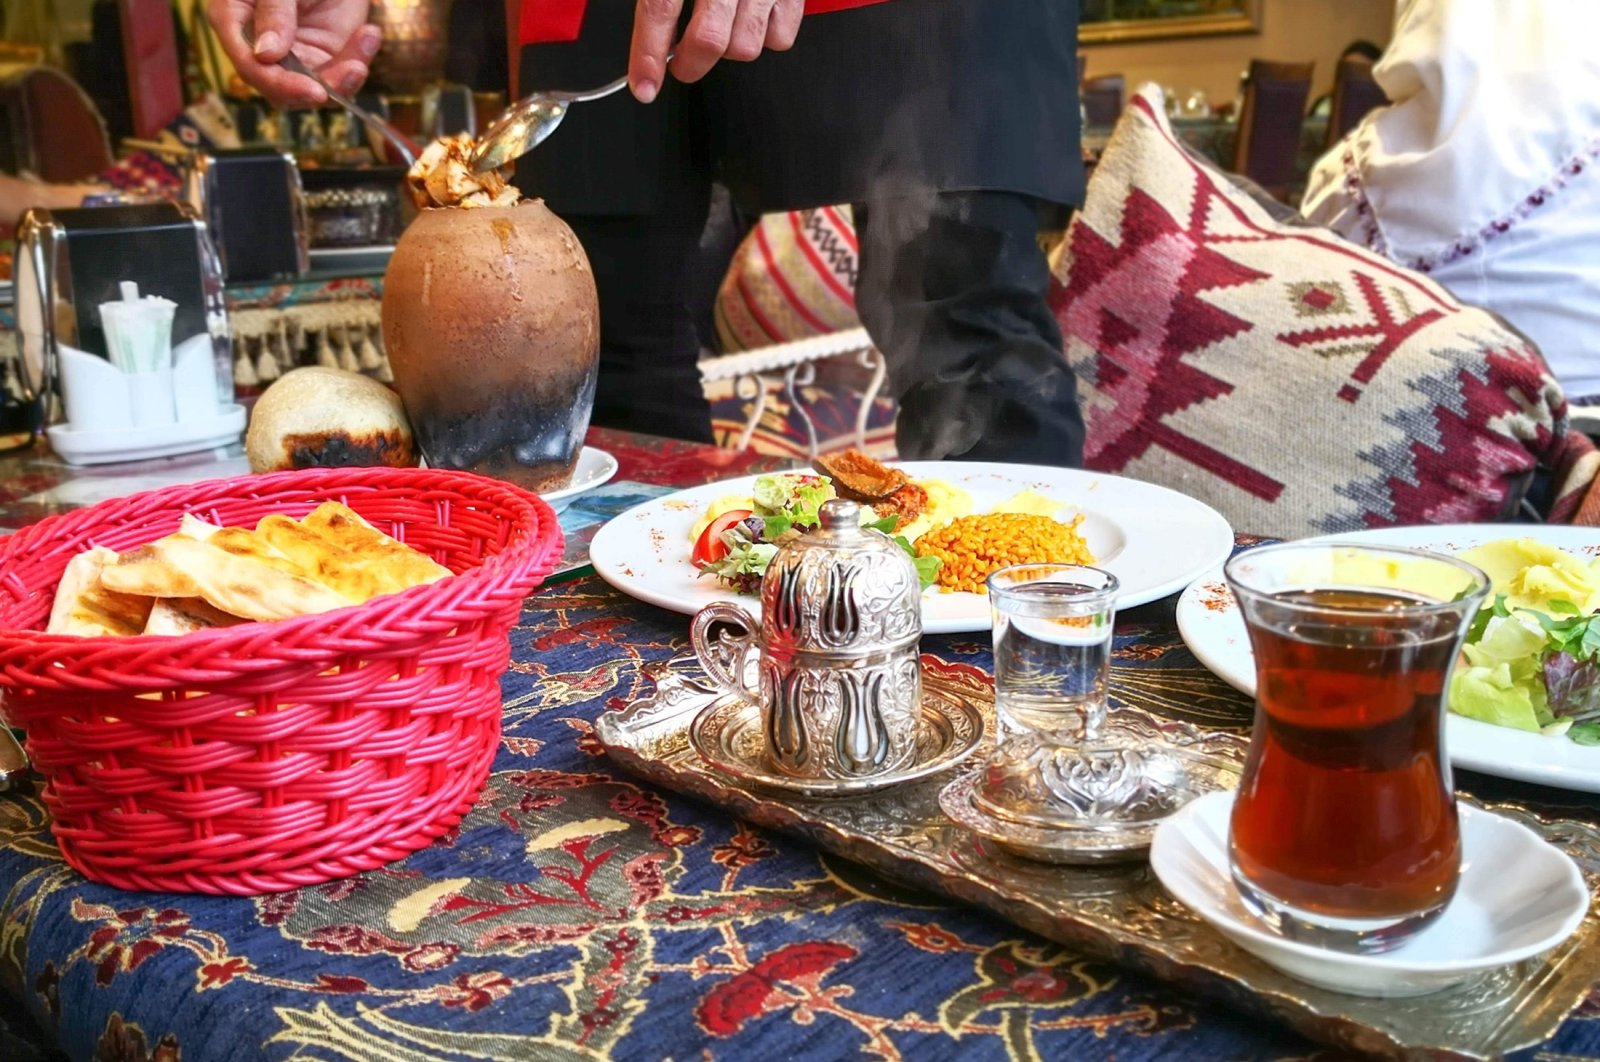 Turks have the ritual of dining down pat, they labor over preparing and enjoying lavish meals while still remaining relatively svelte. (Shutterstock Photo)